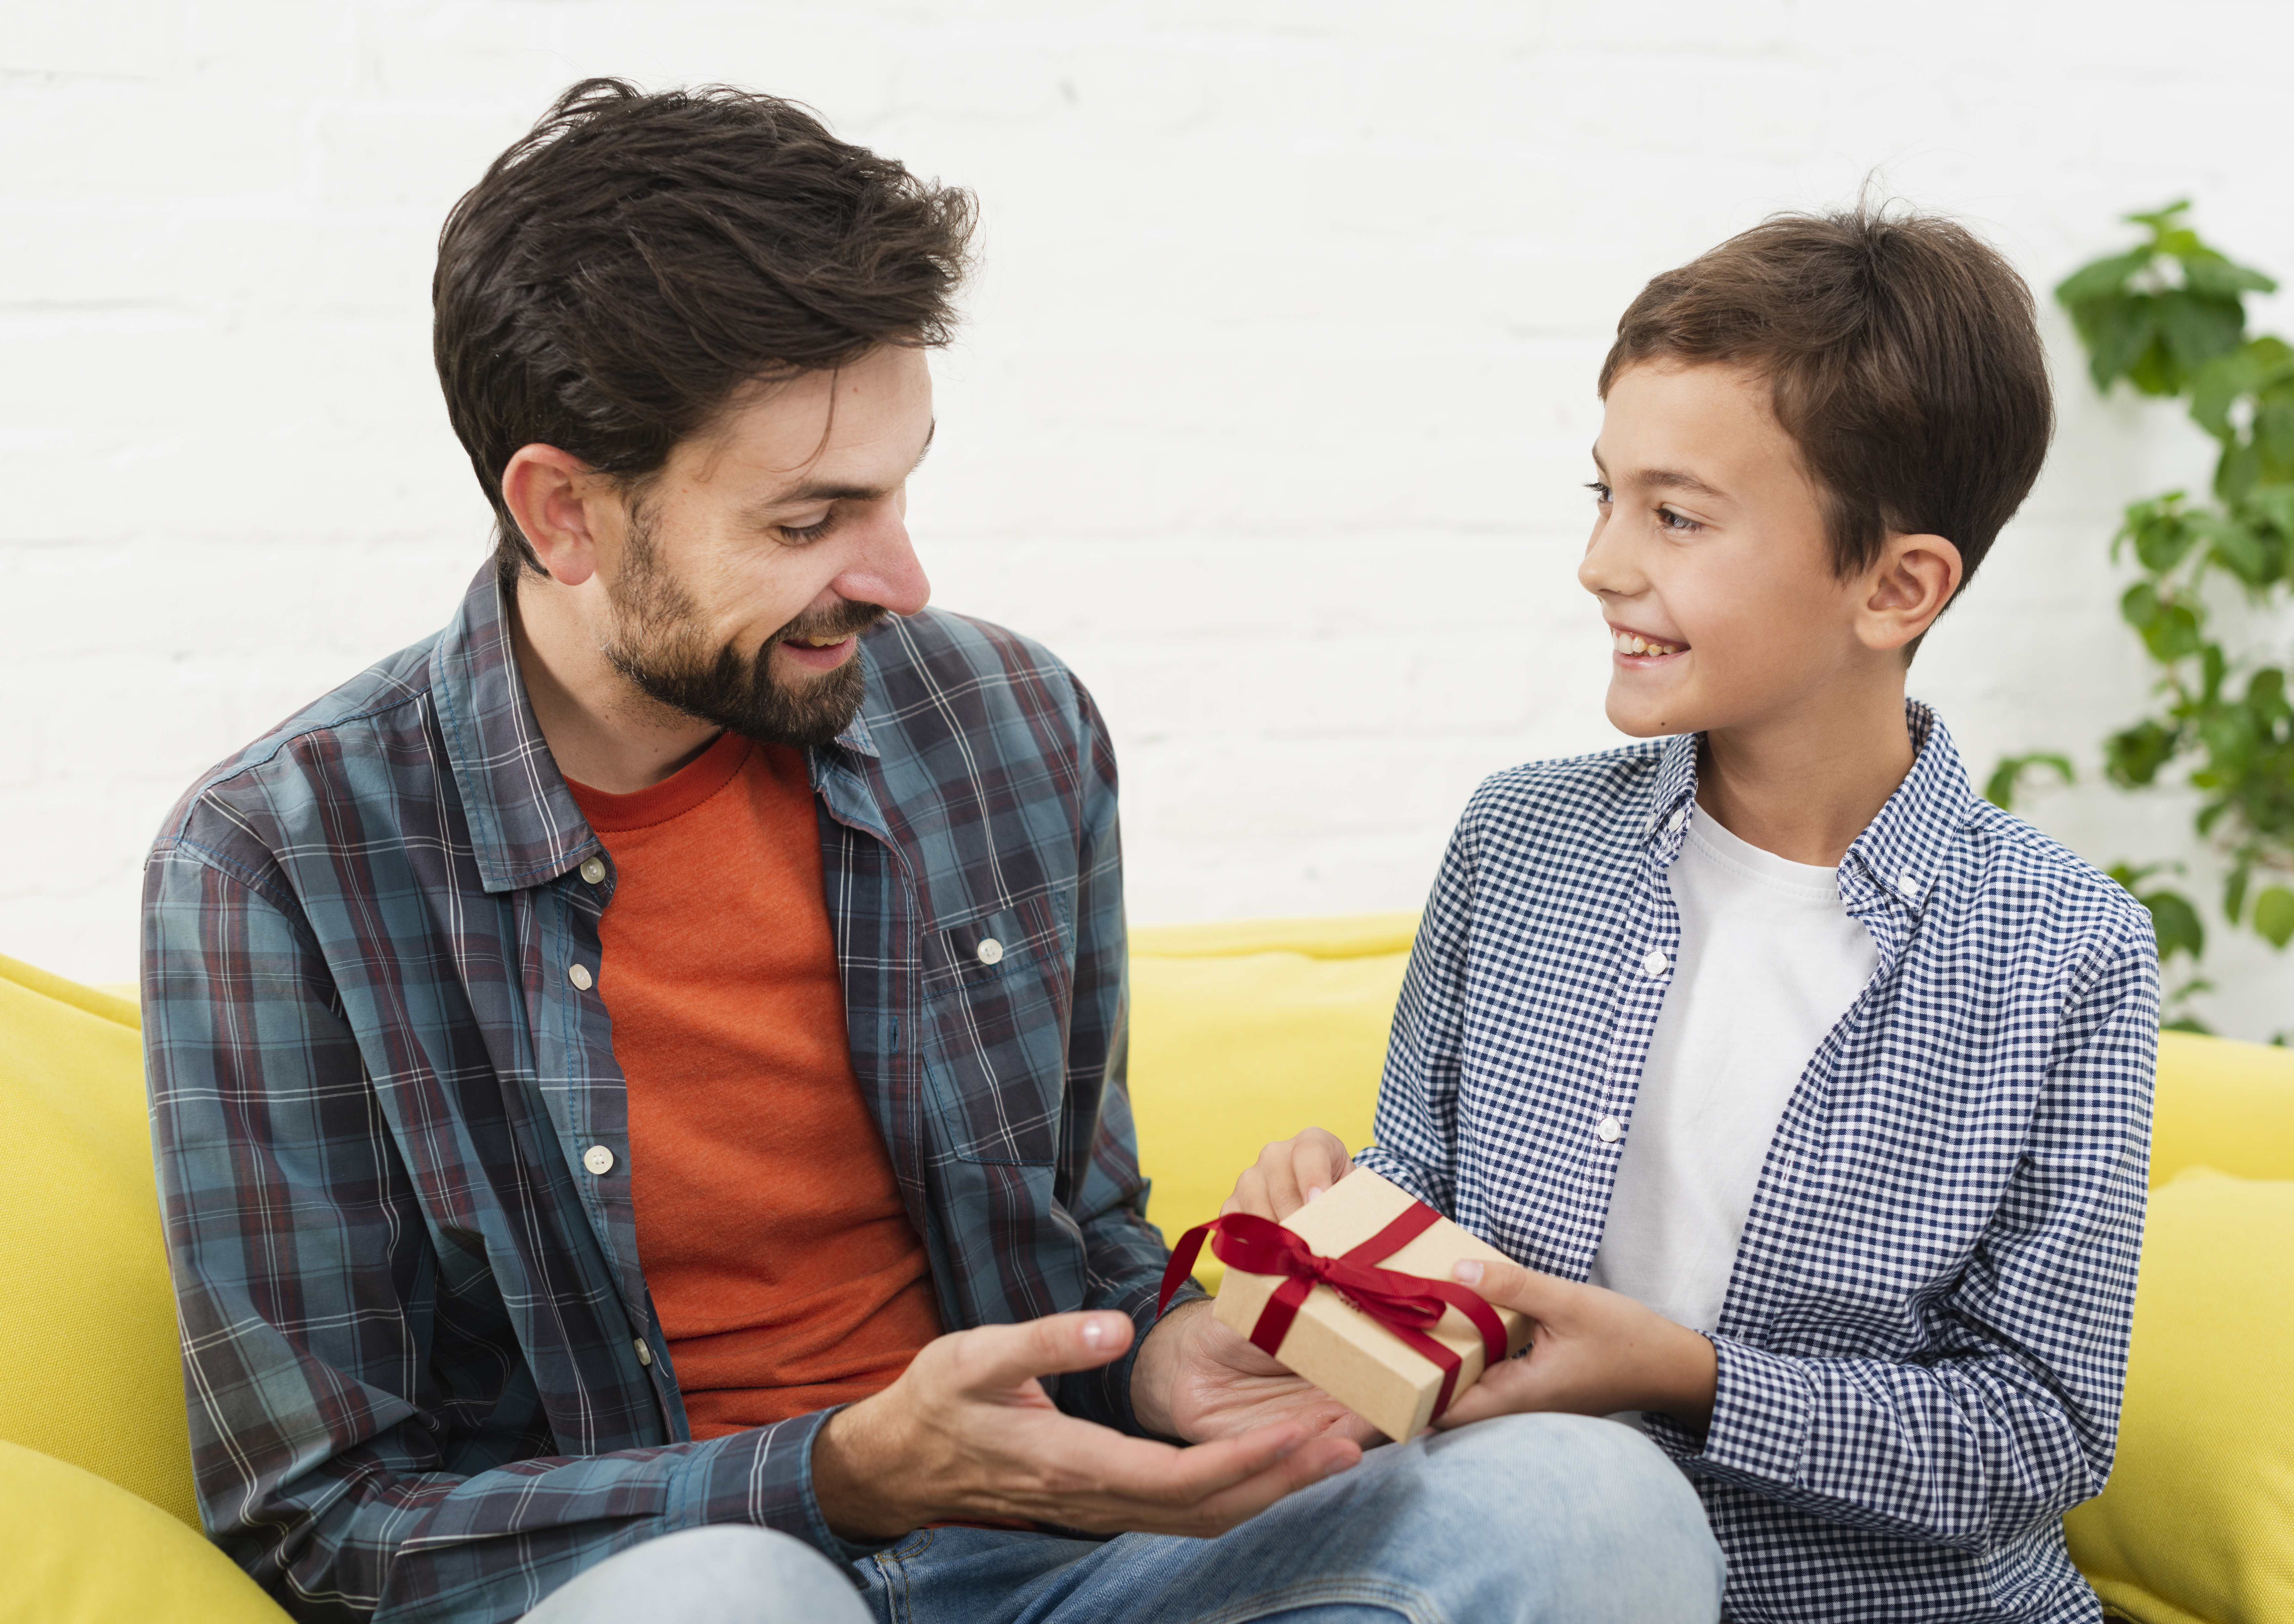 Creative Ways to Make Personalized Gifts for Dad 